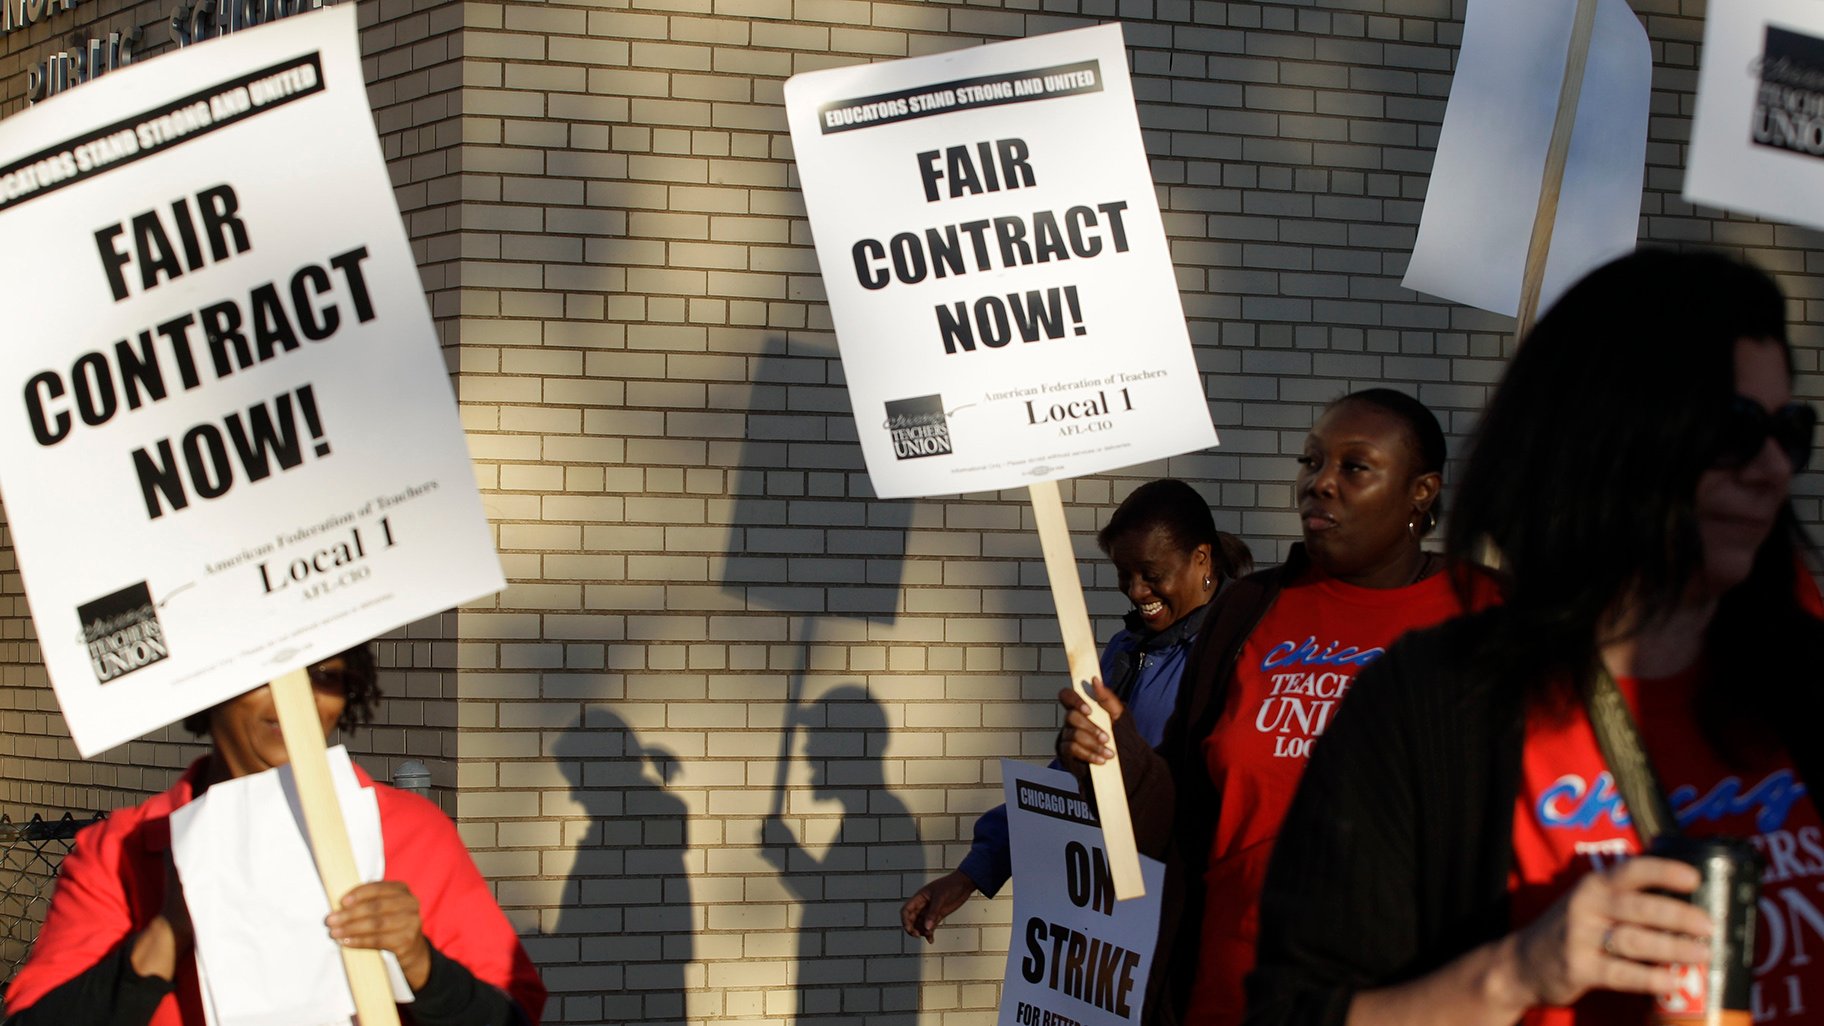 This Sept. 10, 2012 file photo shows Chicago teachers walking a picket line outside a school in Chicago, after they went on strike for the first time in 25 years. (AP Photo / M. Spencer Green, File)